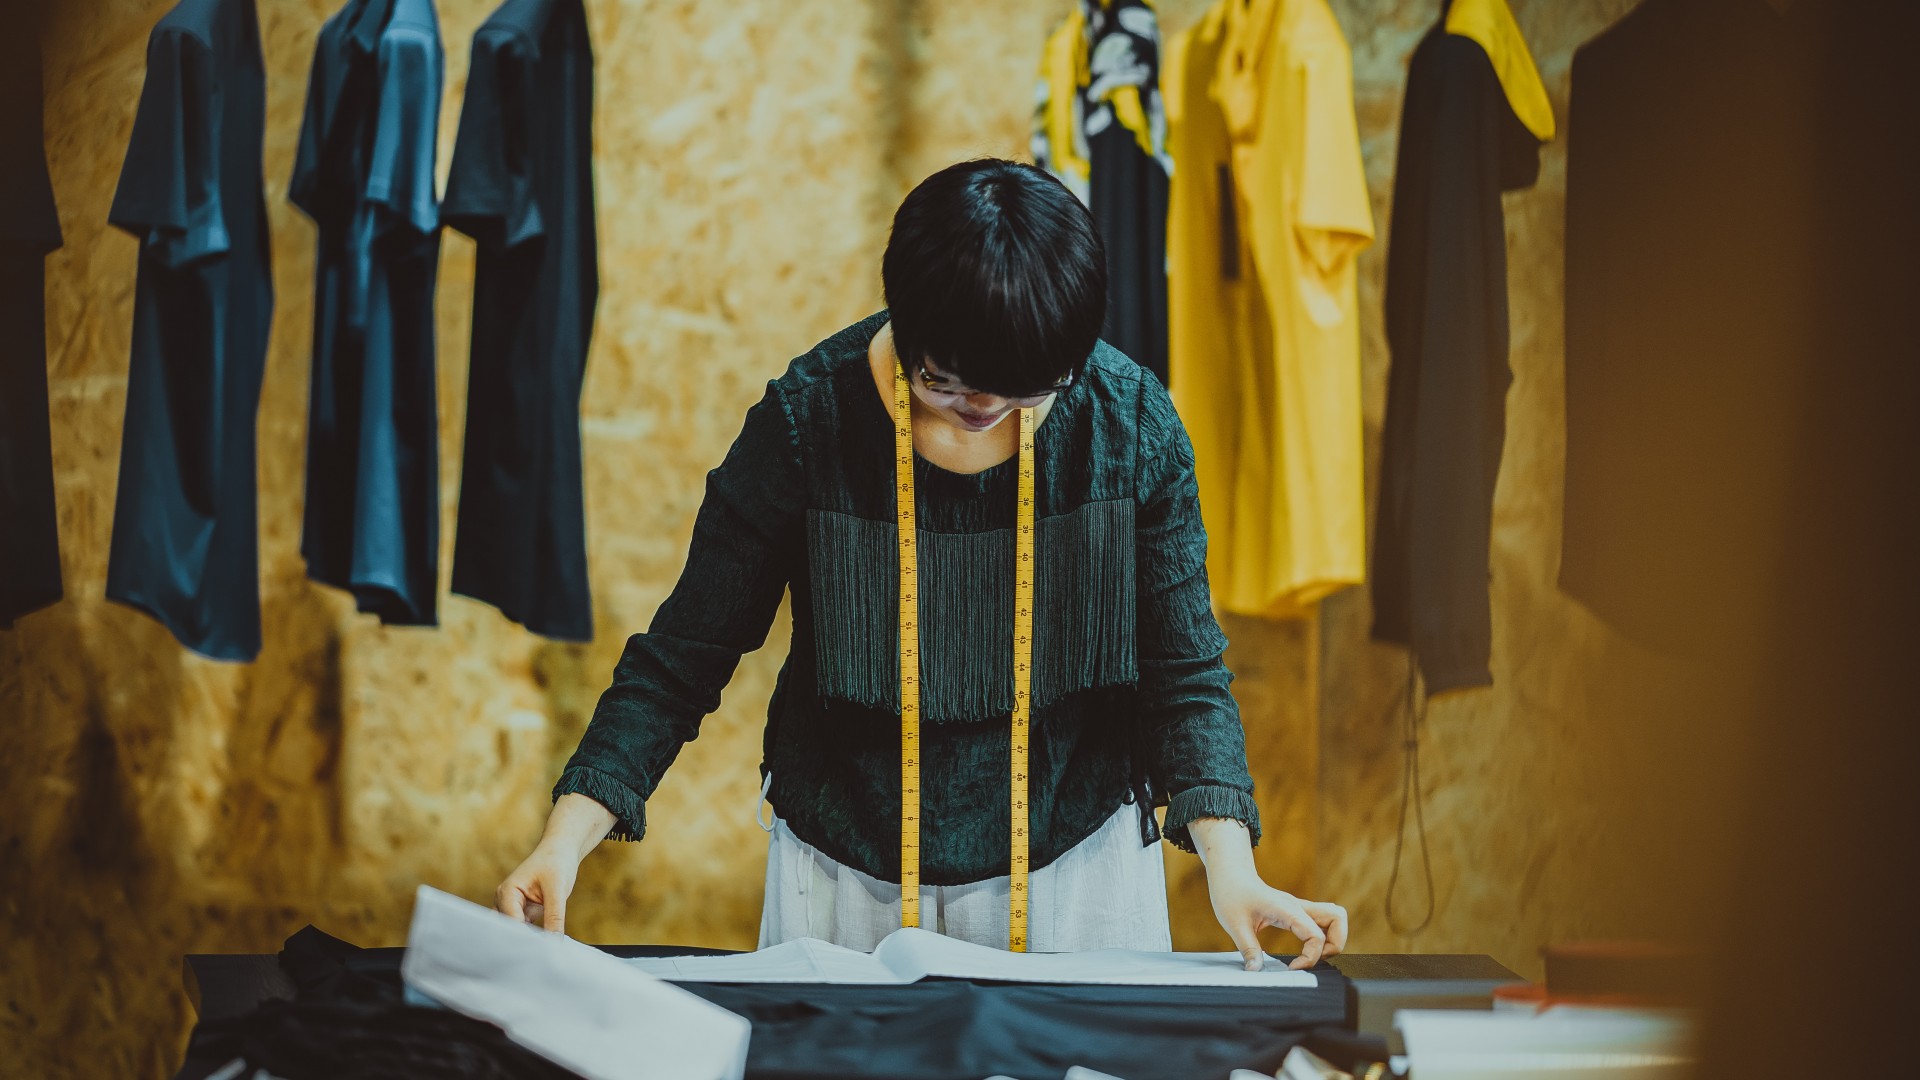 Seamstress working in a shop; Photo by Kenny Luo on Unsplash